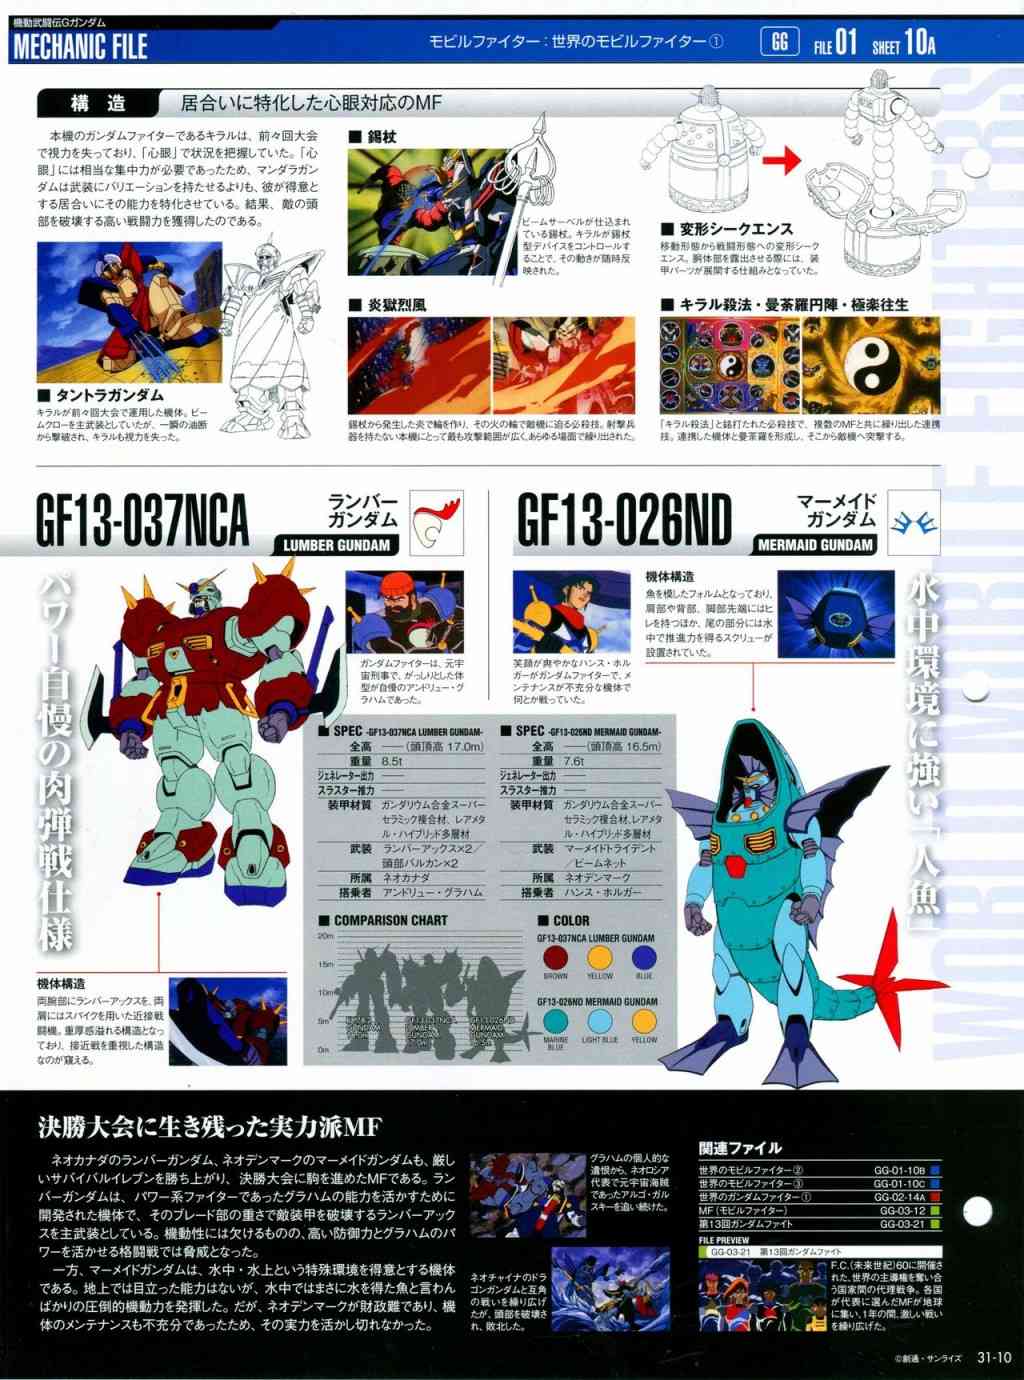 The Official Gundam Perfect File  - 第31-40話(1/8) - 7